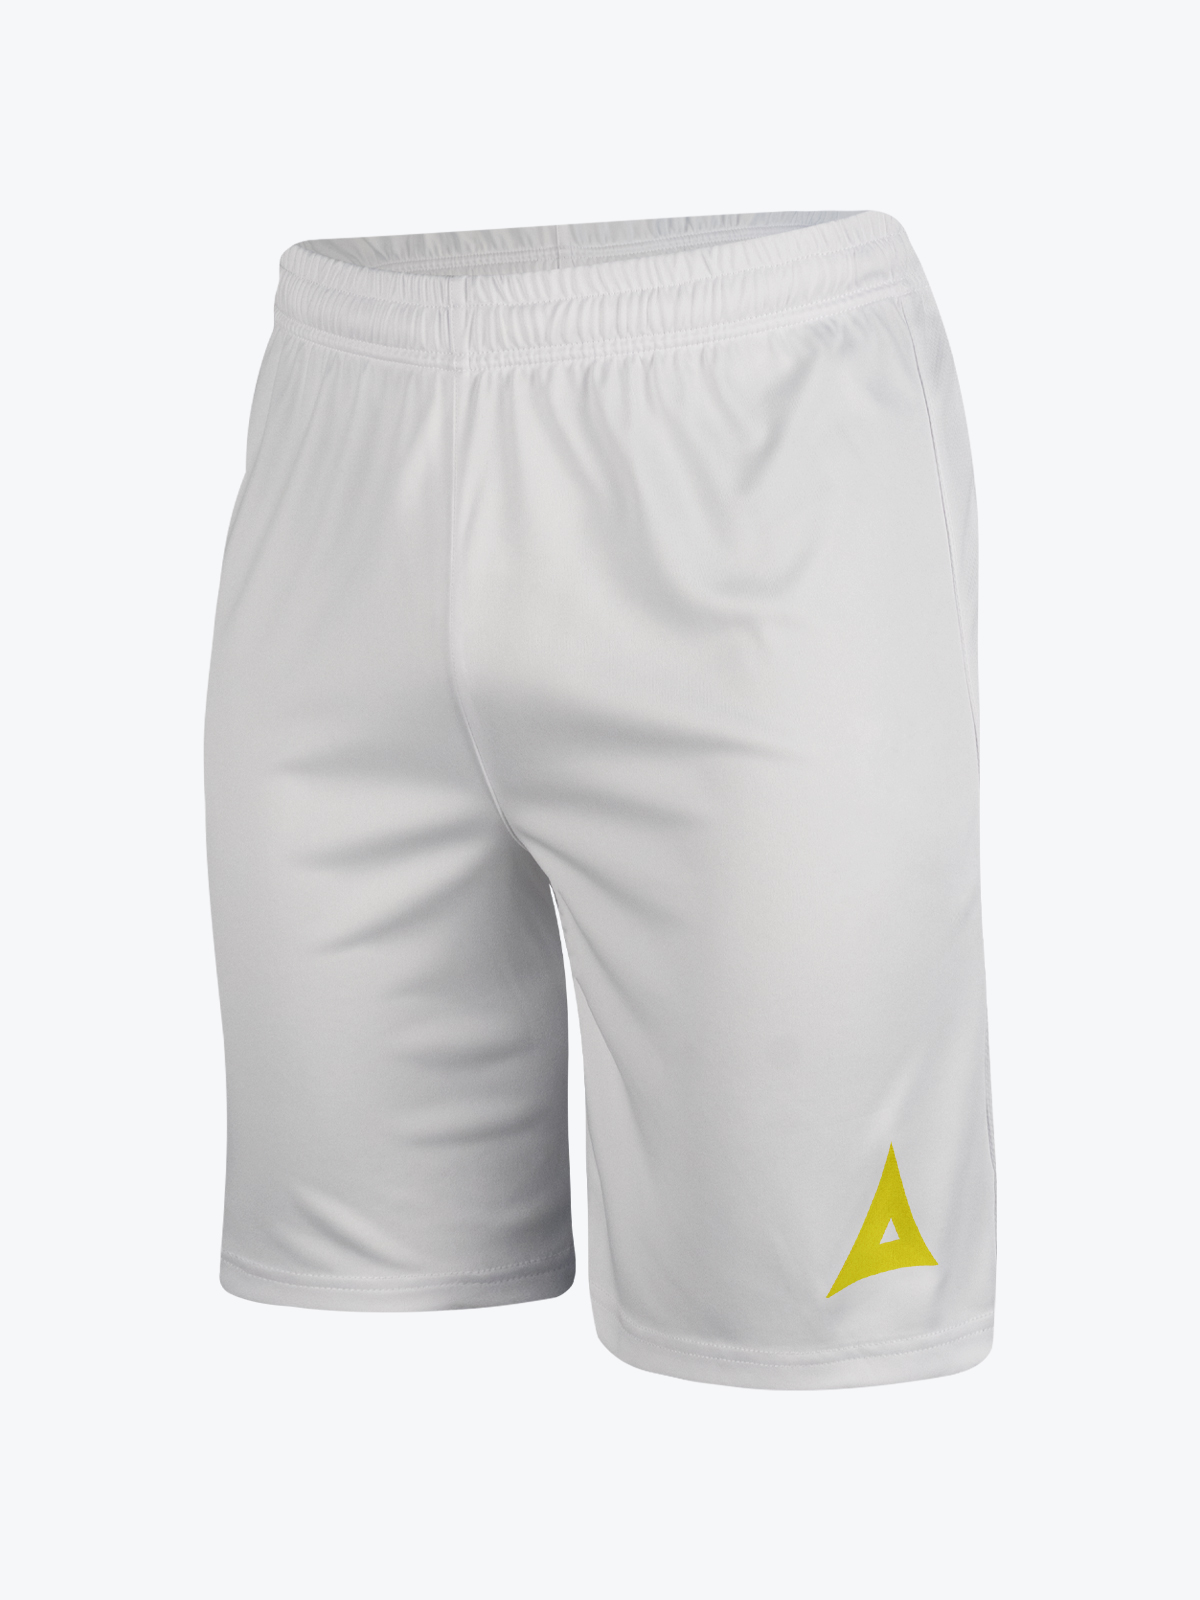 picture of focus 2 classic short - white/yellow